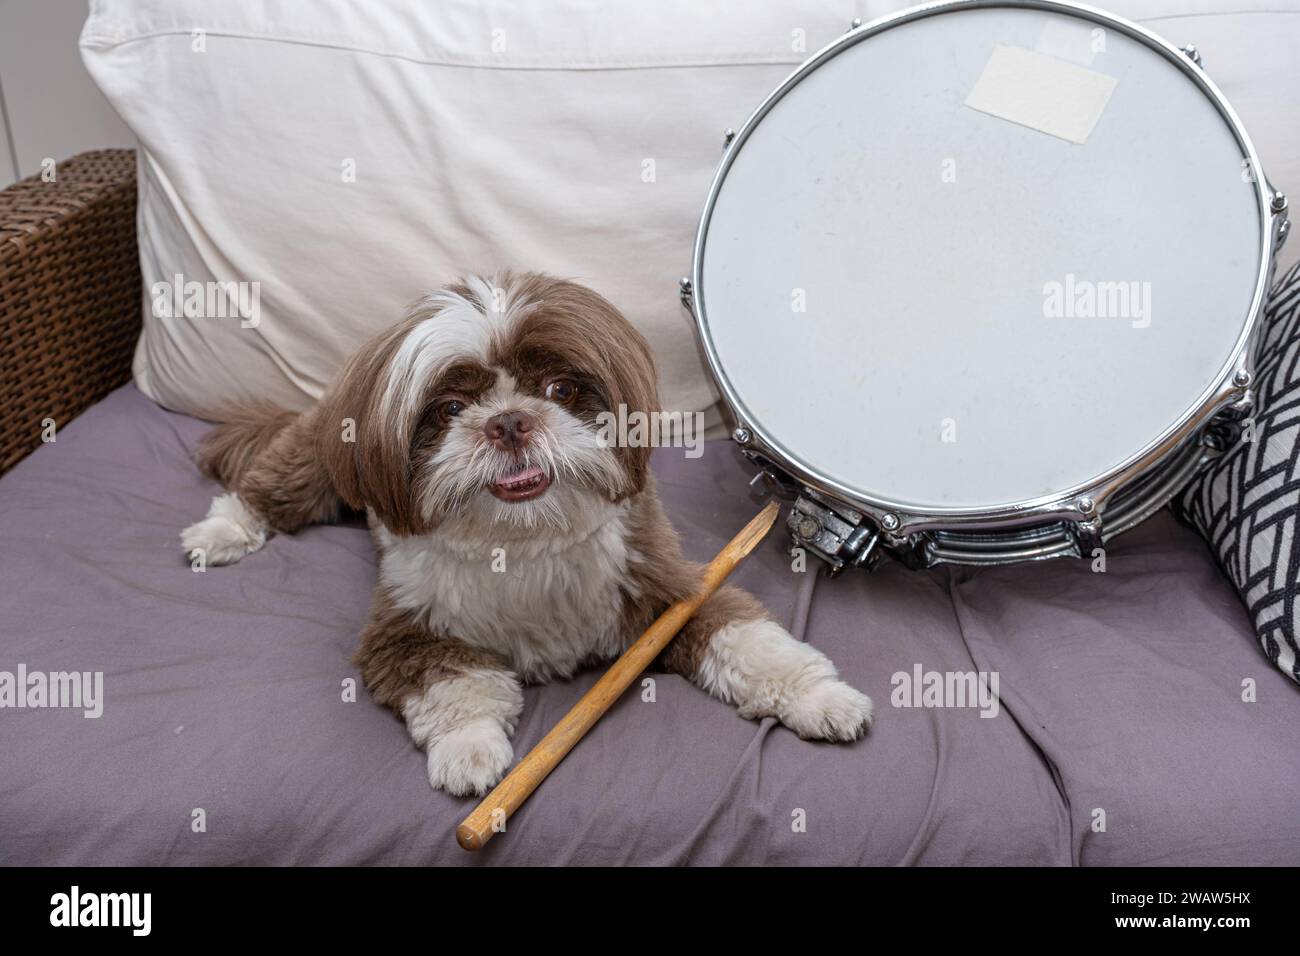 2 year old shih tzu with a tongue outside a drumstick and a metal snare 3. Stock Photo